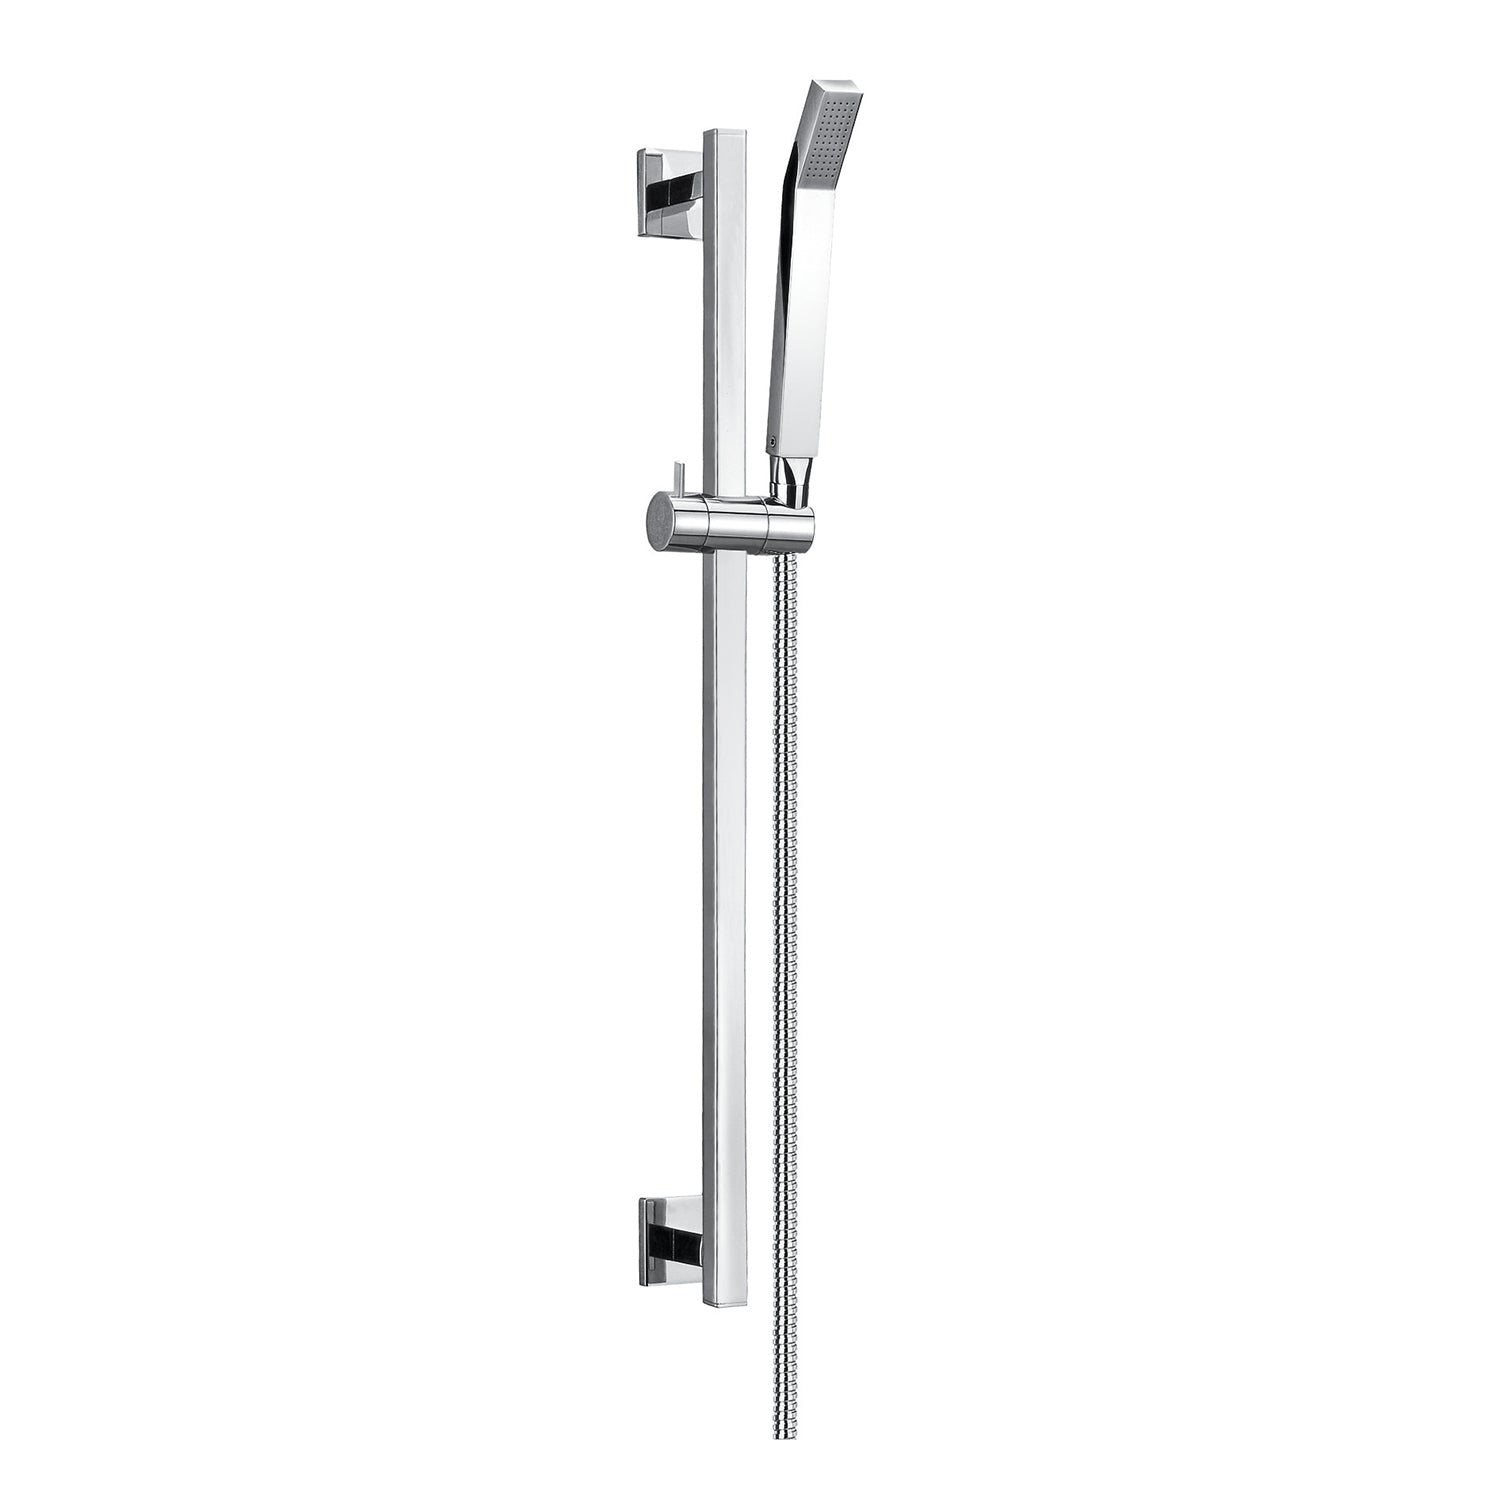 DAX Hand Shower Head with Square Adjustable Slide Bar, Stainless Steel Body, Chrome Finish, 23-5/8 x 2-3/8 Inches (DAX-9523)